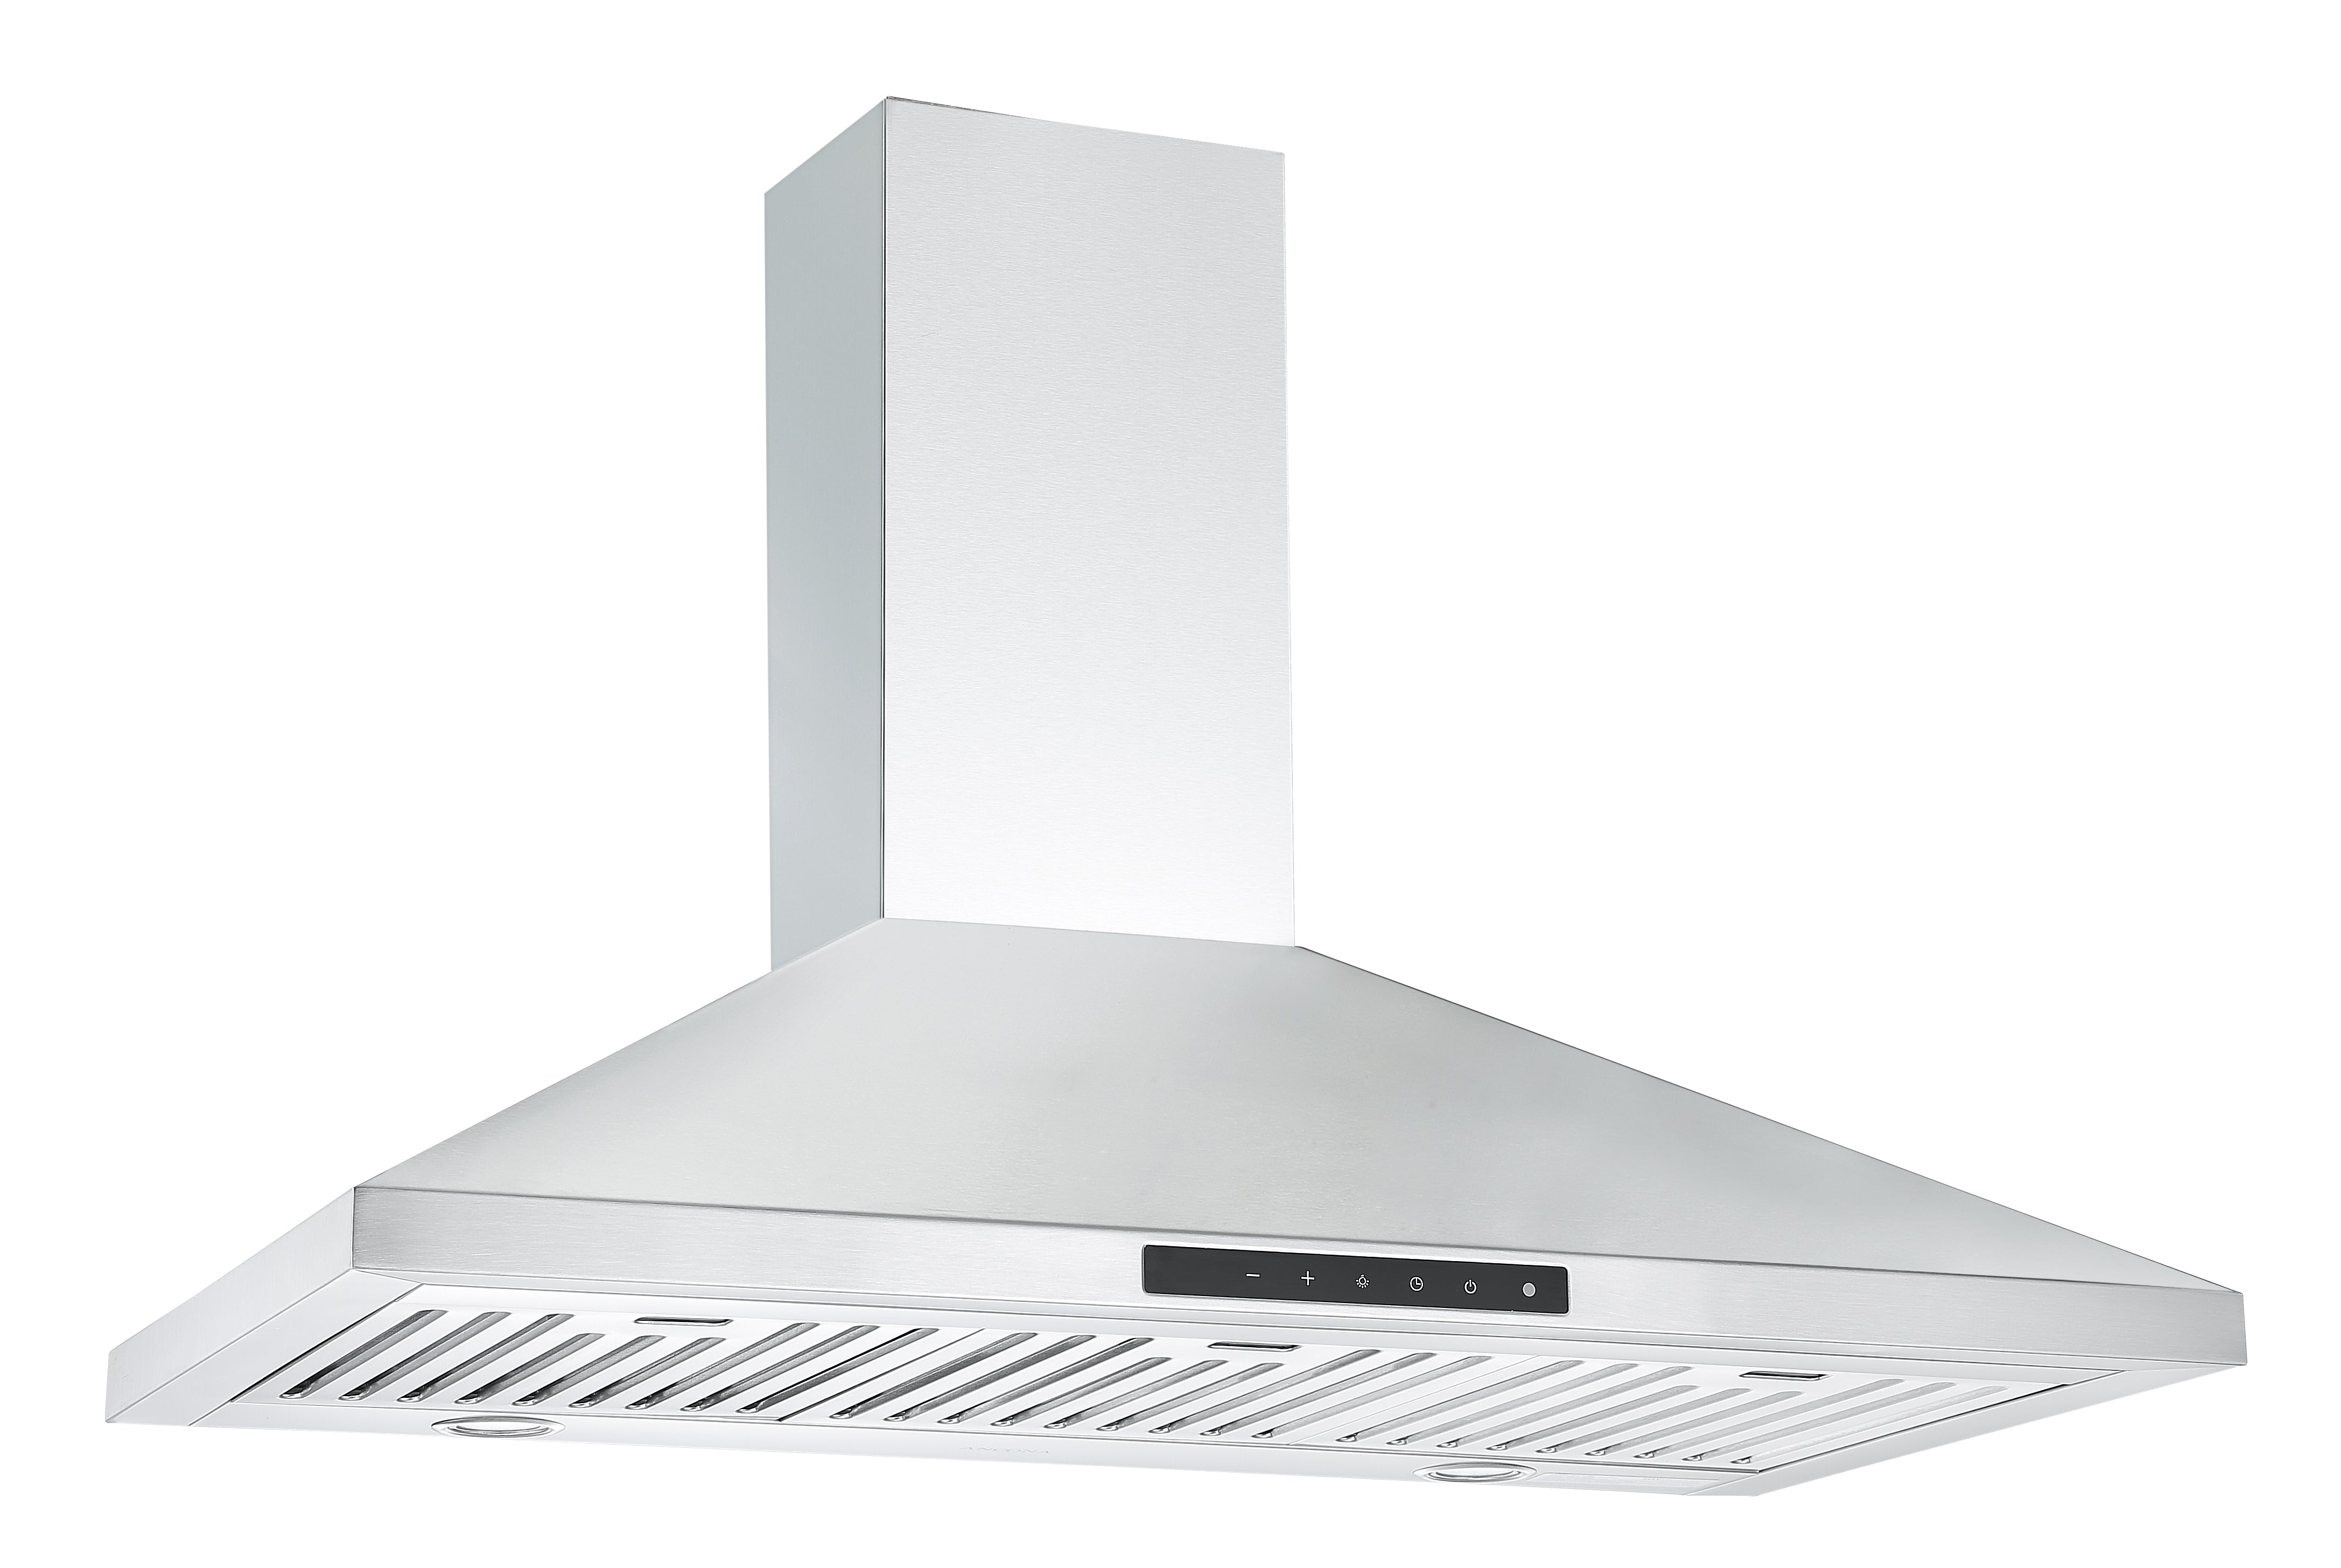 WPNL636 36 in. Wall Mount Pyramid Range Hood in Stainless Steel with Night Light Feature